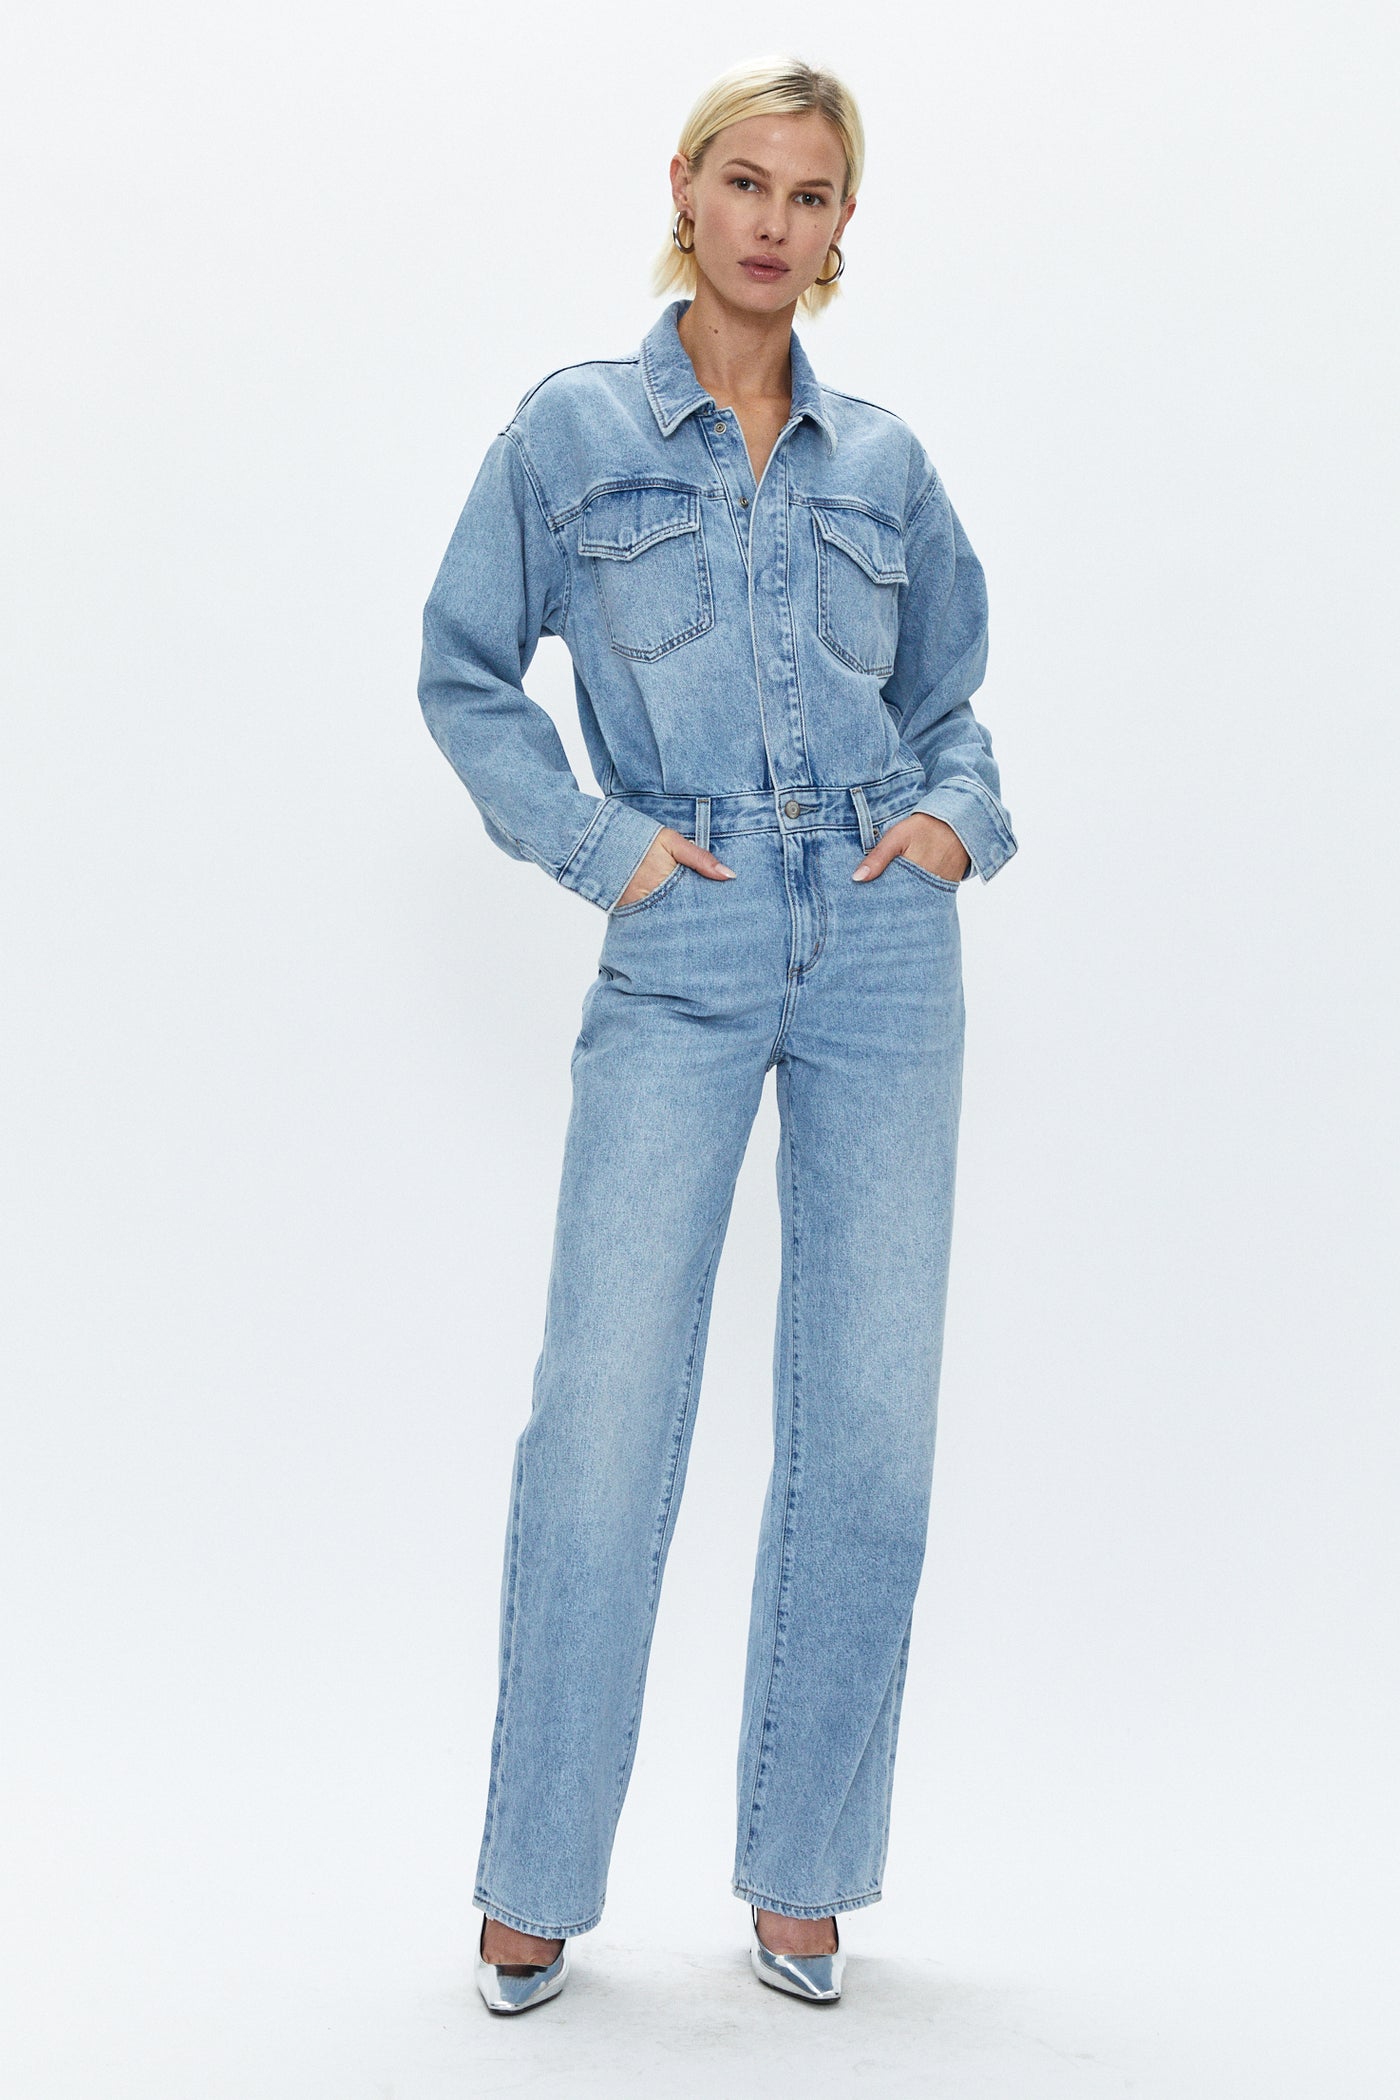 AMILIEe Women Ripped Denim Jean Jumpsuit Adjustable India | Ubuy